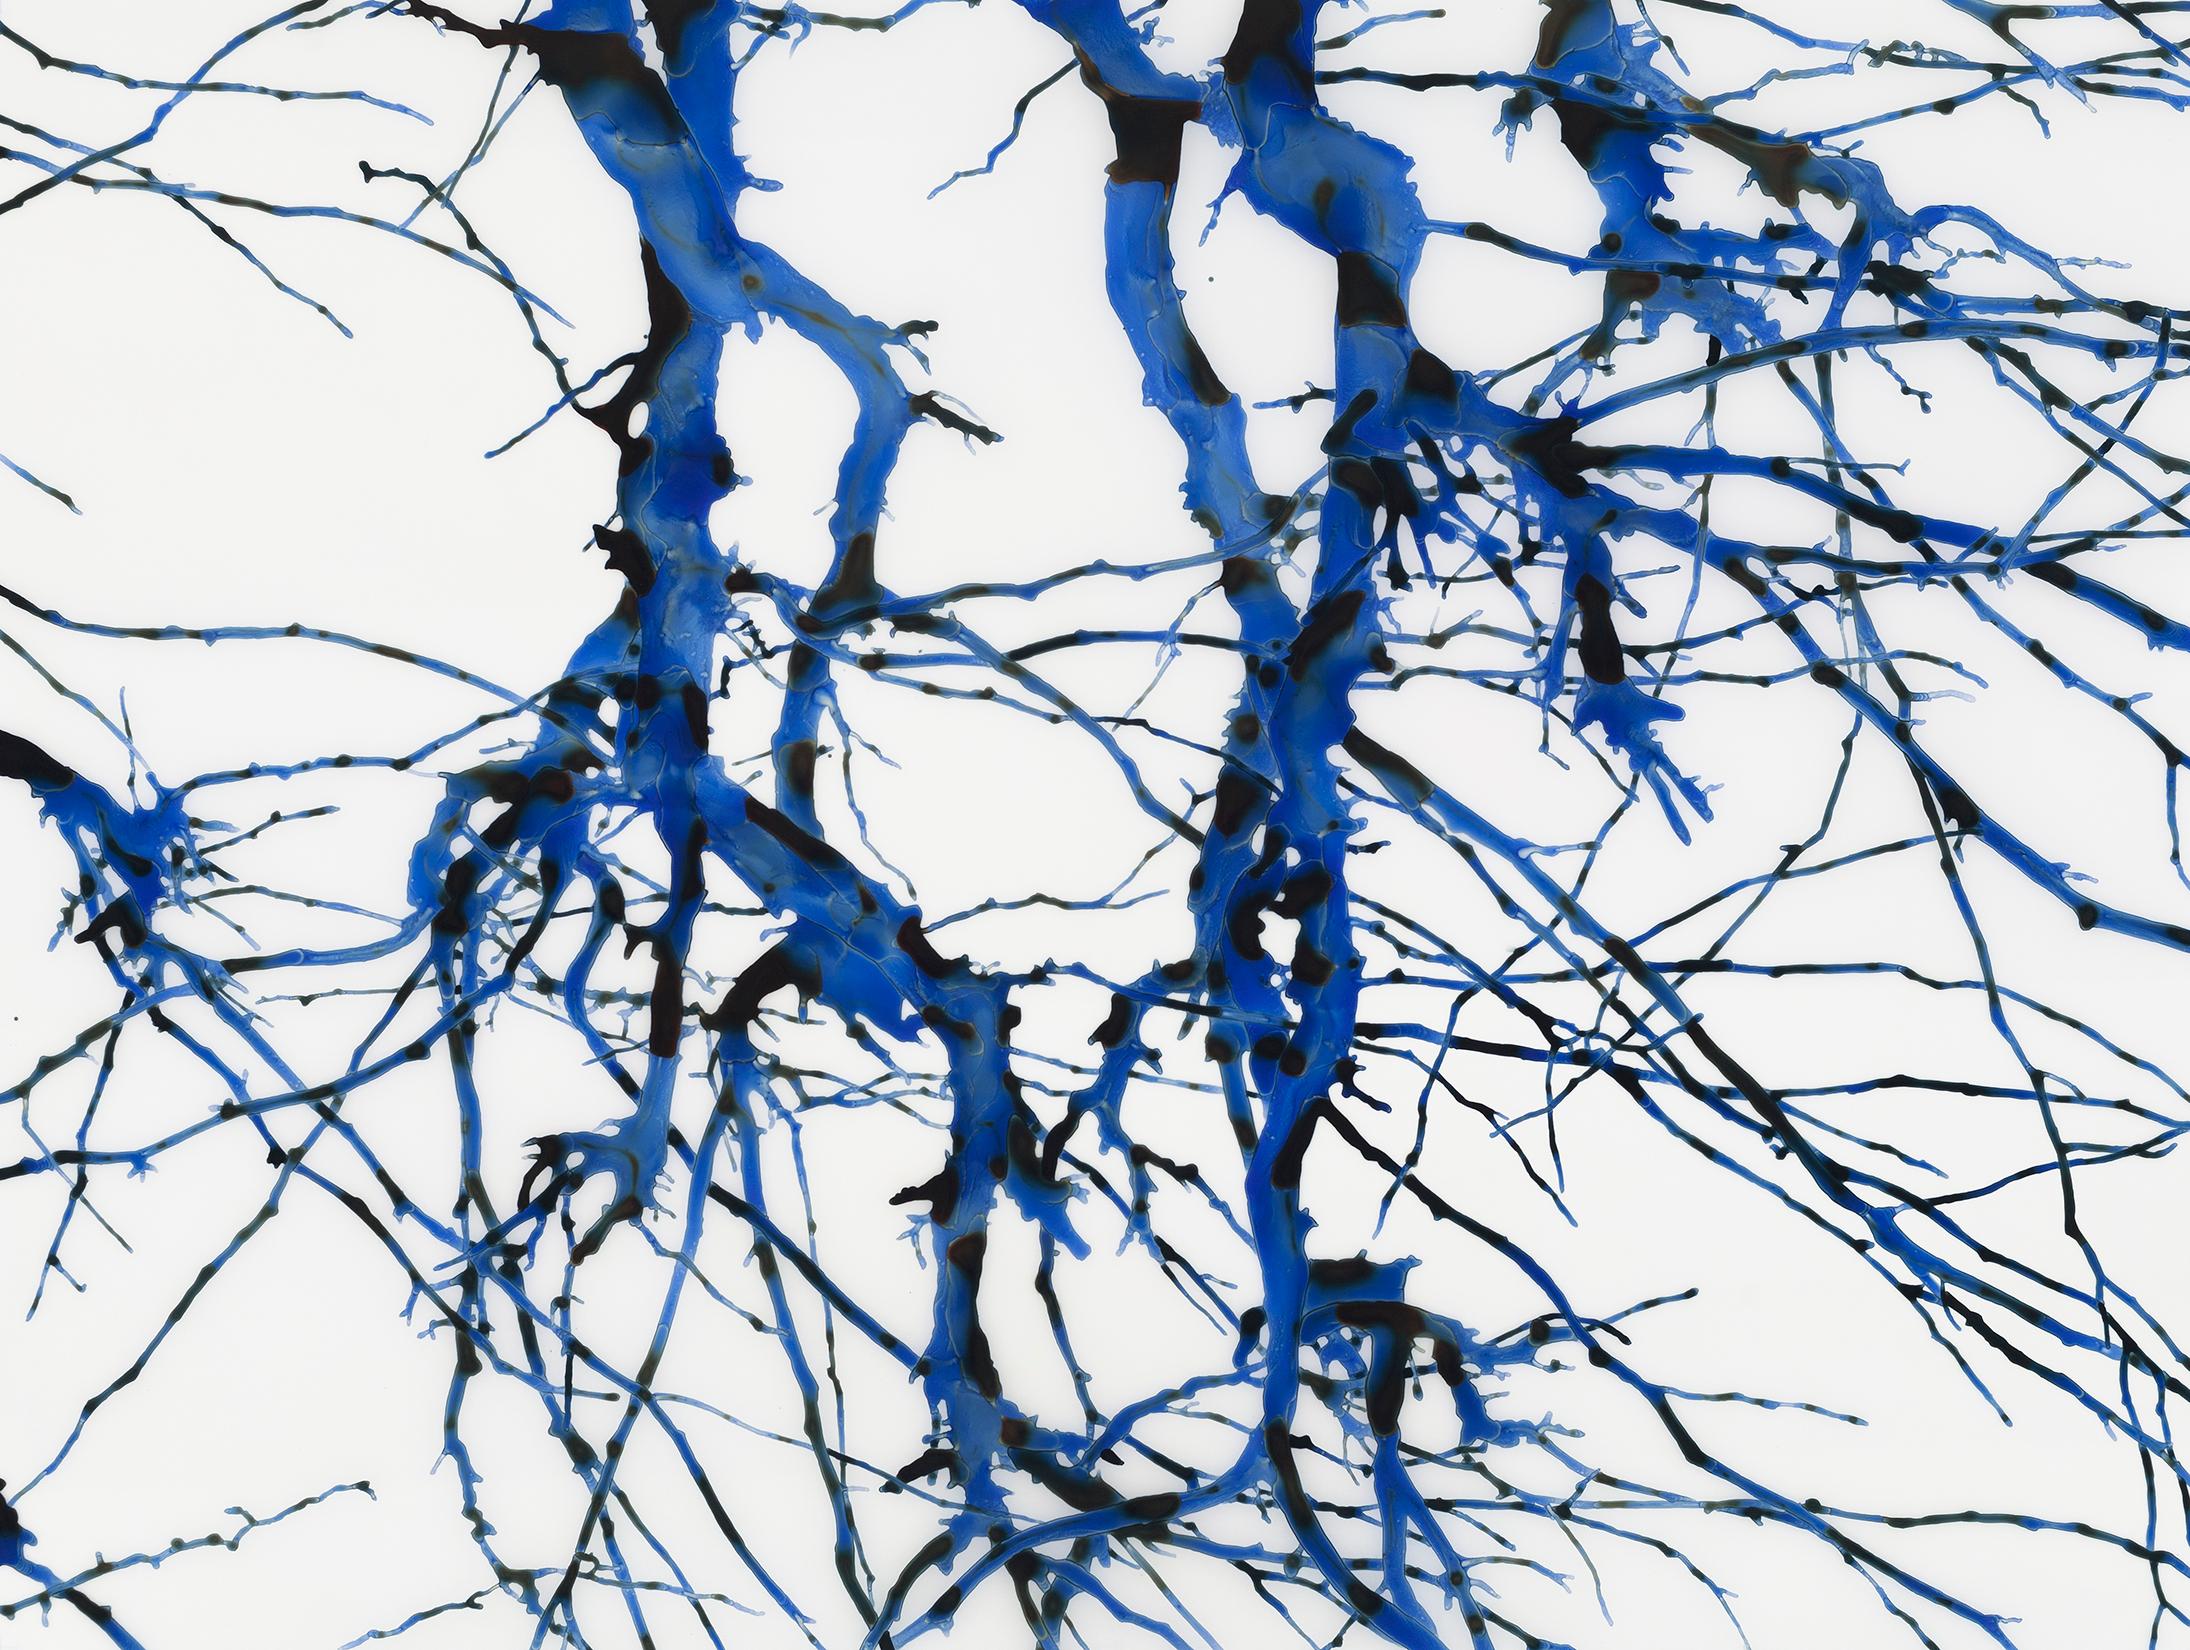 Inazuma m1, Cobalt, Dark Blue Tree Branches, White Mylar - Painting by Jackie Battenfield